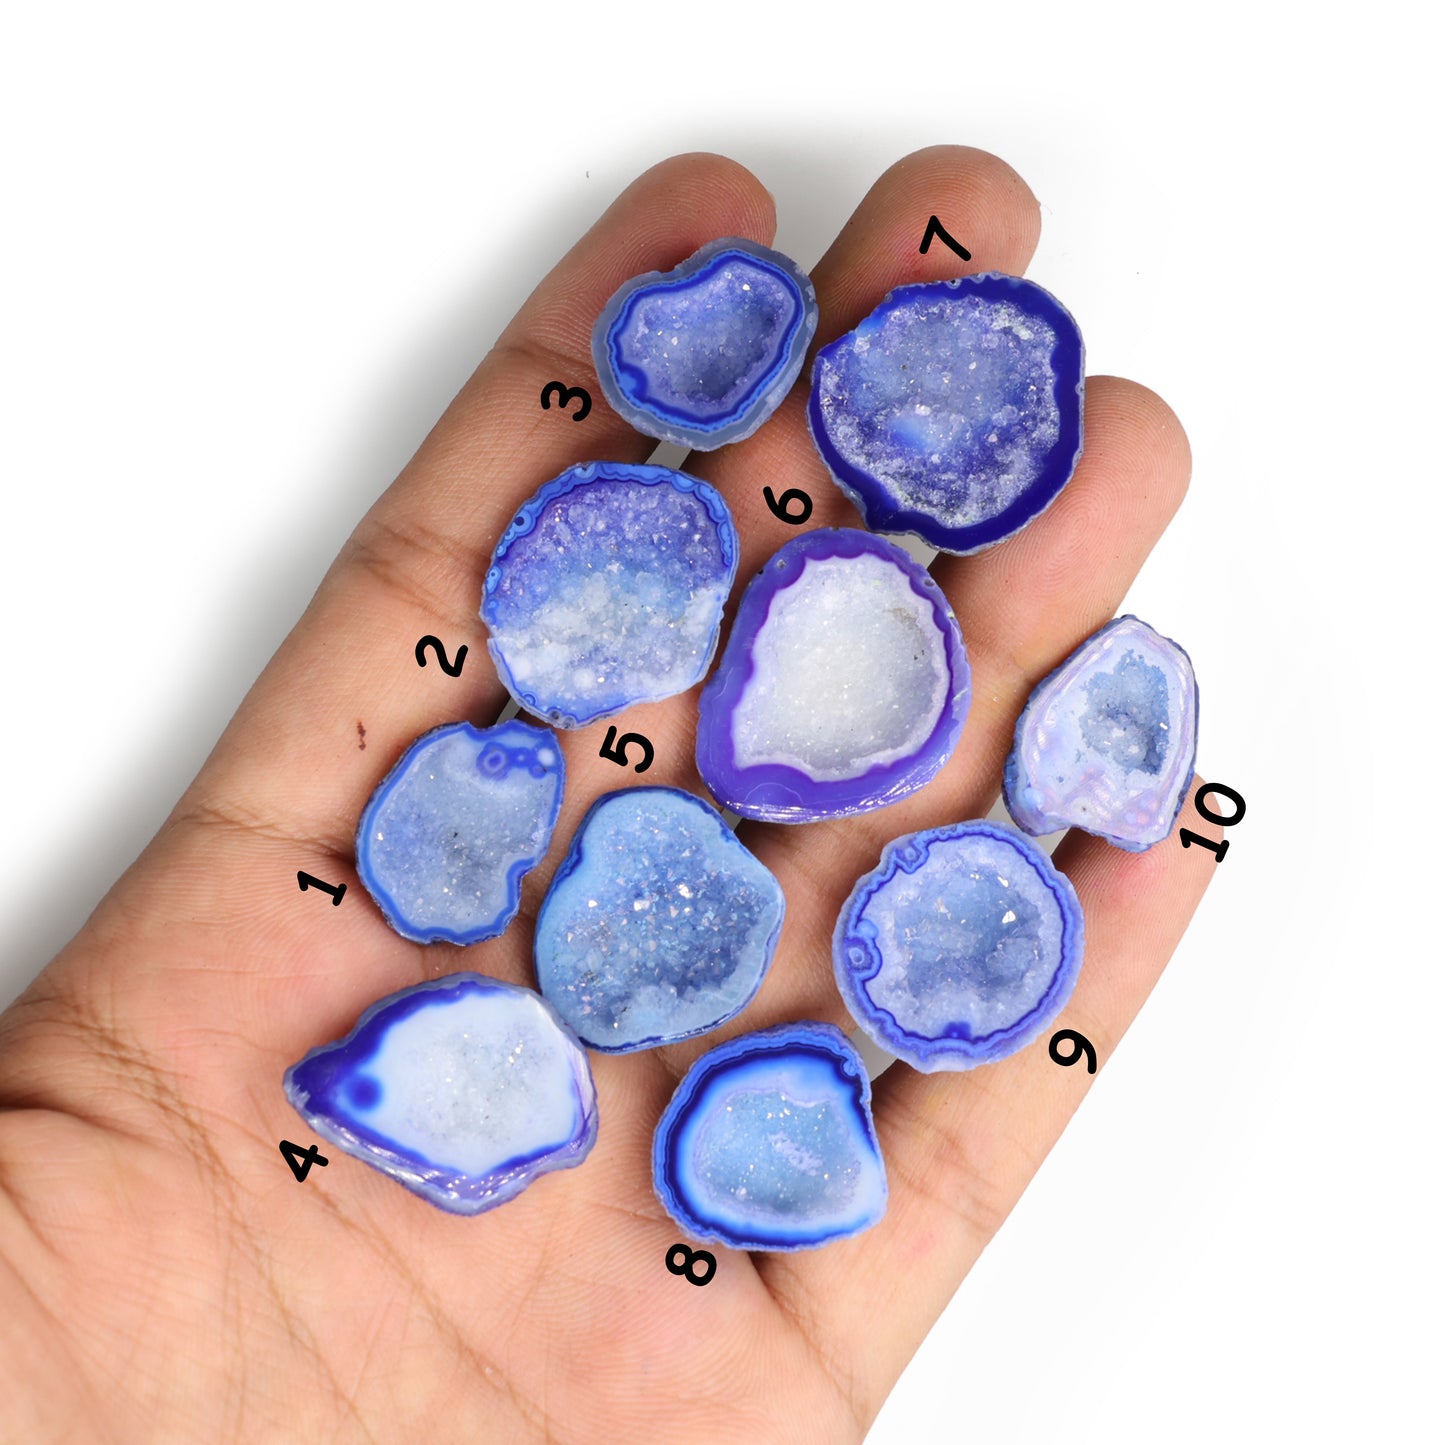 Geode druzy stone***You can Order Exact Piece as in Photos***